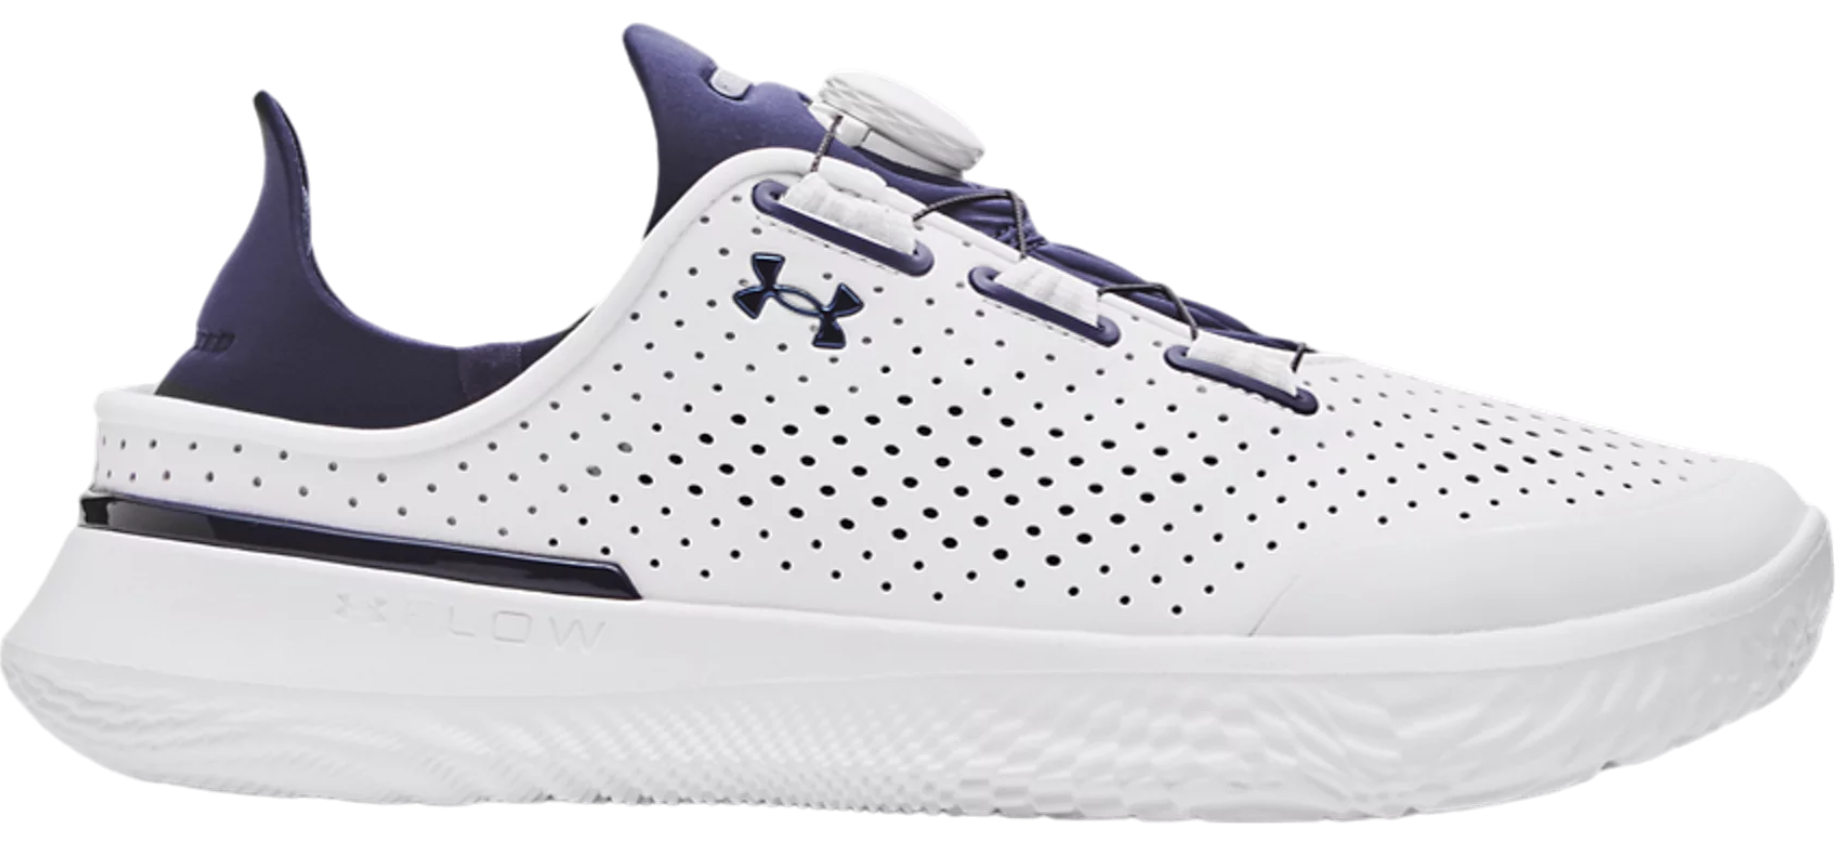 Chaussures de fitness Under Armour Flow Slipspeed Trainr SYN